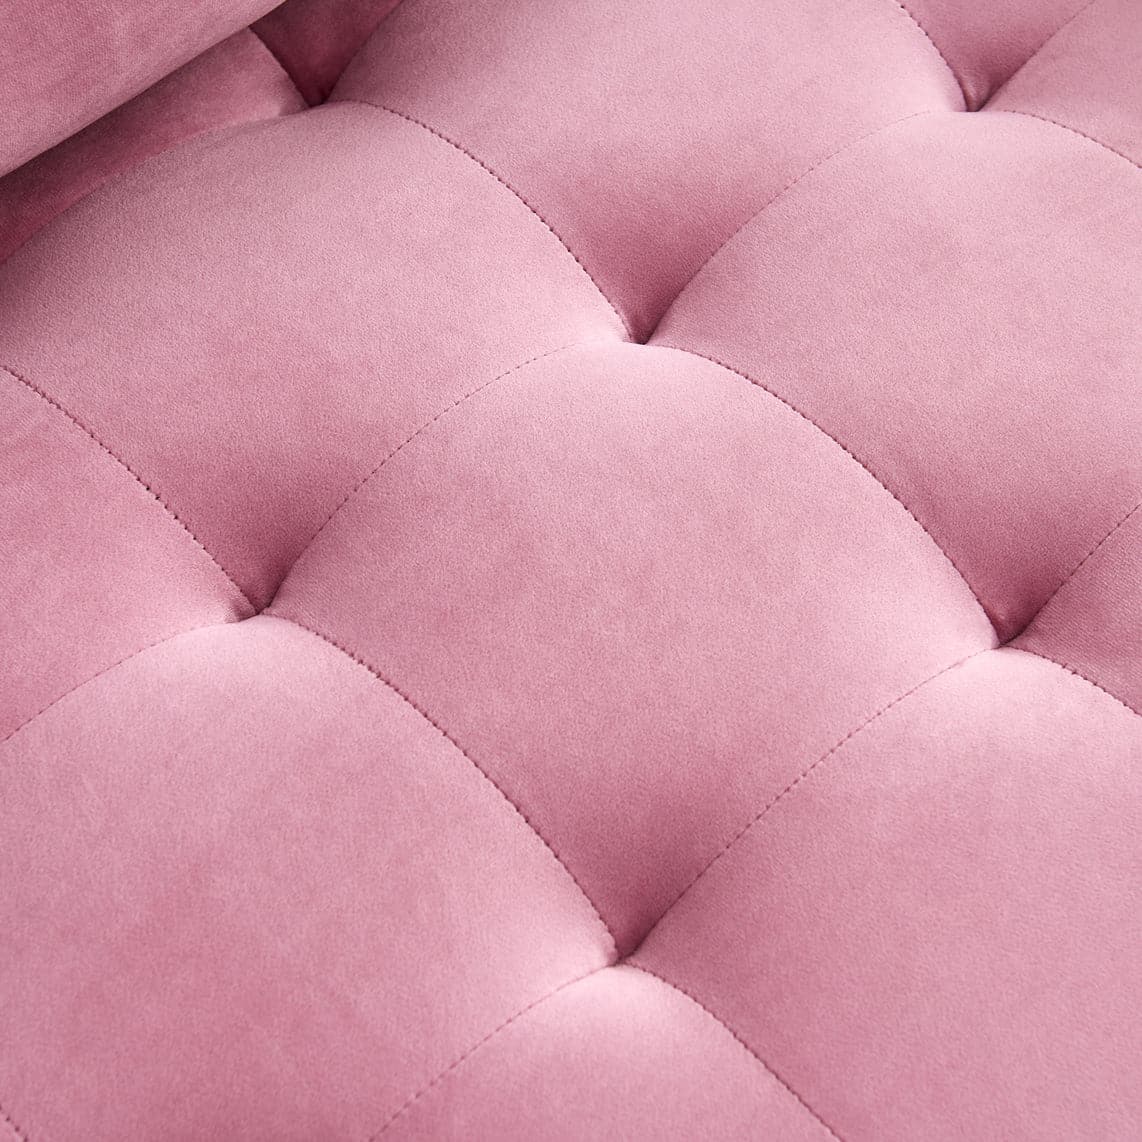 TFC&H Co. Modern Velvet Fabric Sofa 71" - Pink- Ships from The US - sofa at TFC&H Co.